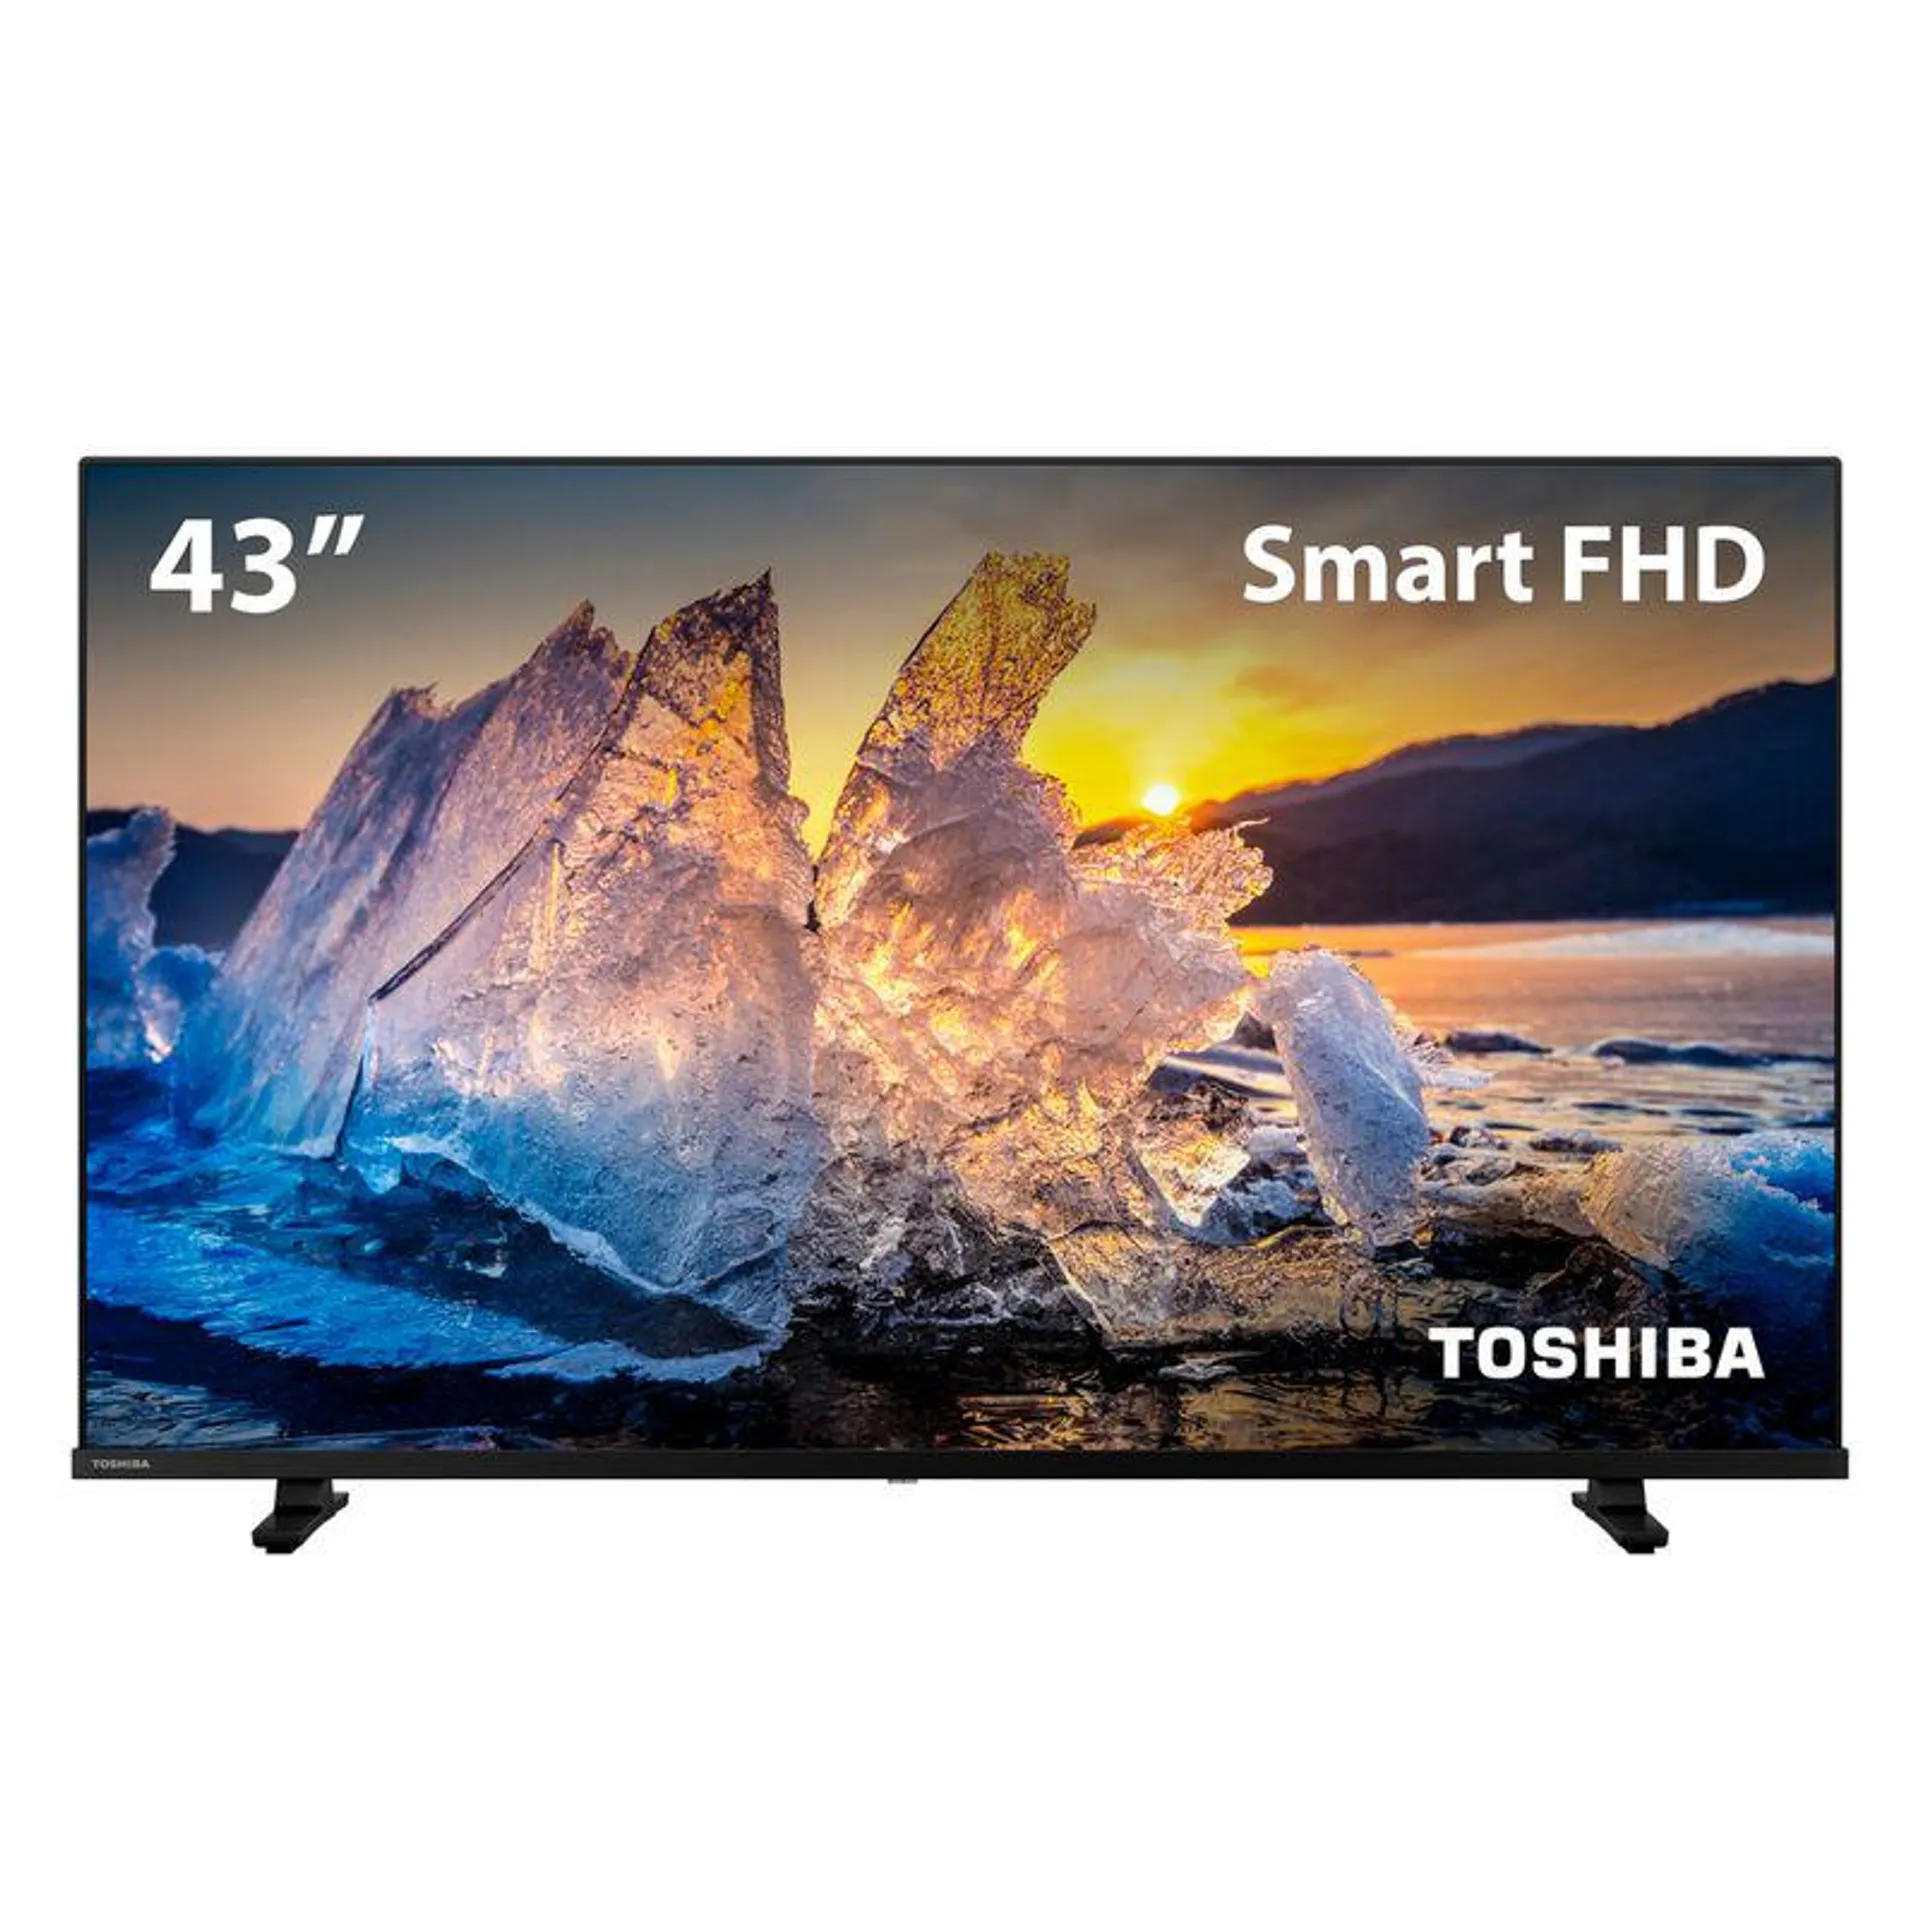 Smart TV Toshiba 43" DLED Full HD Dolby Audio TB021M